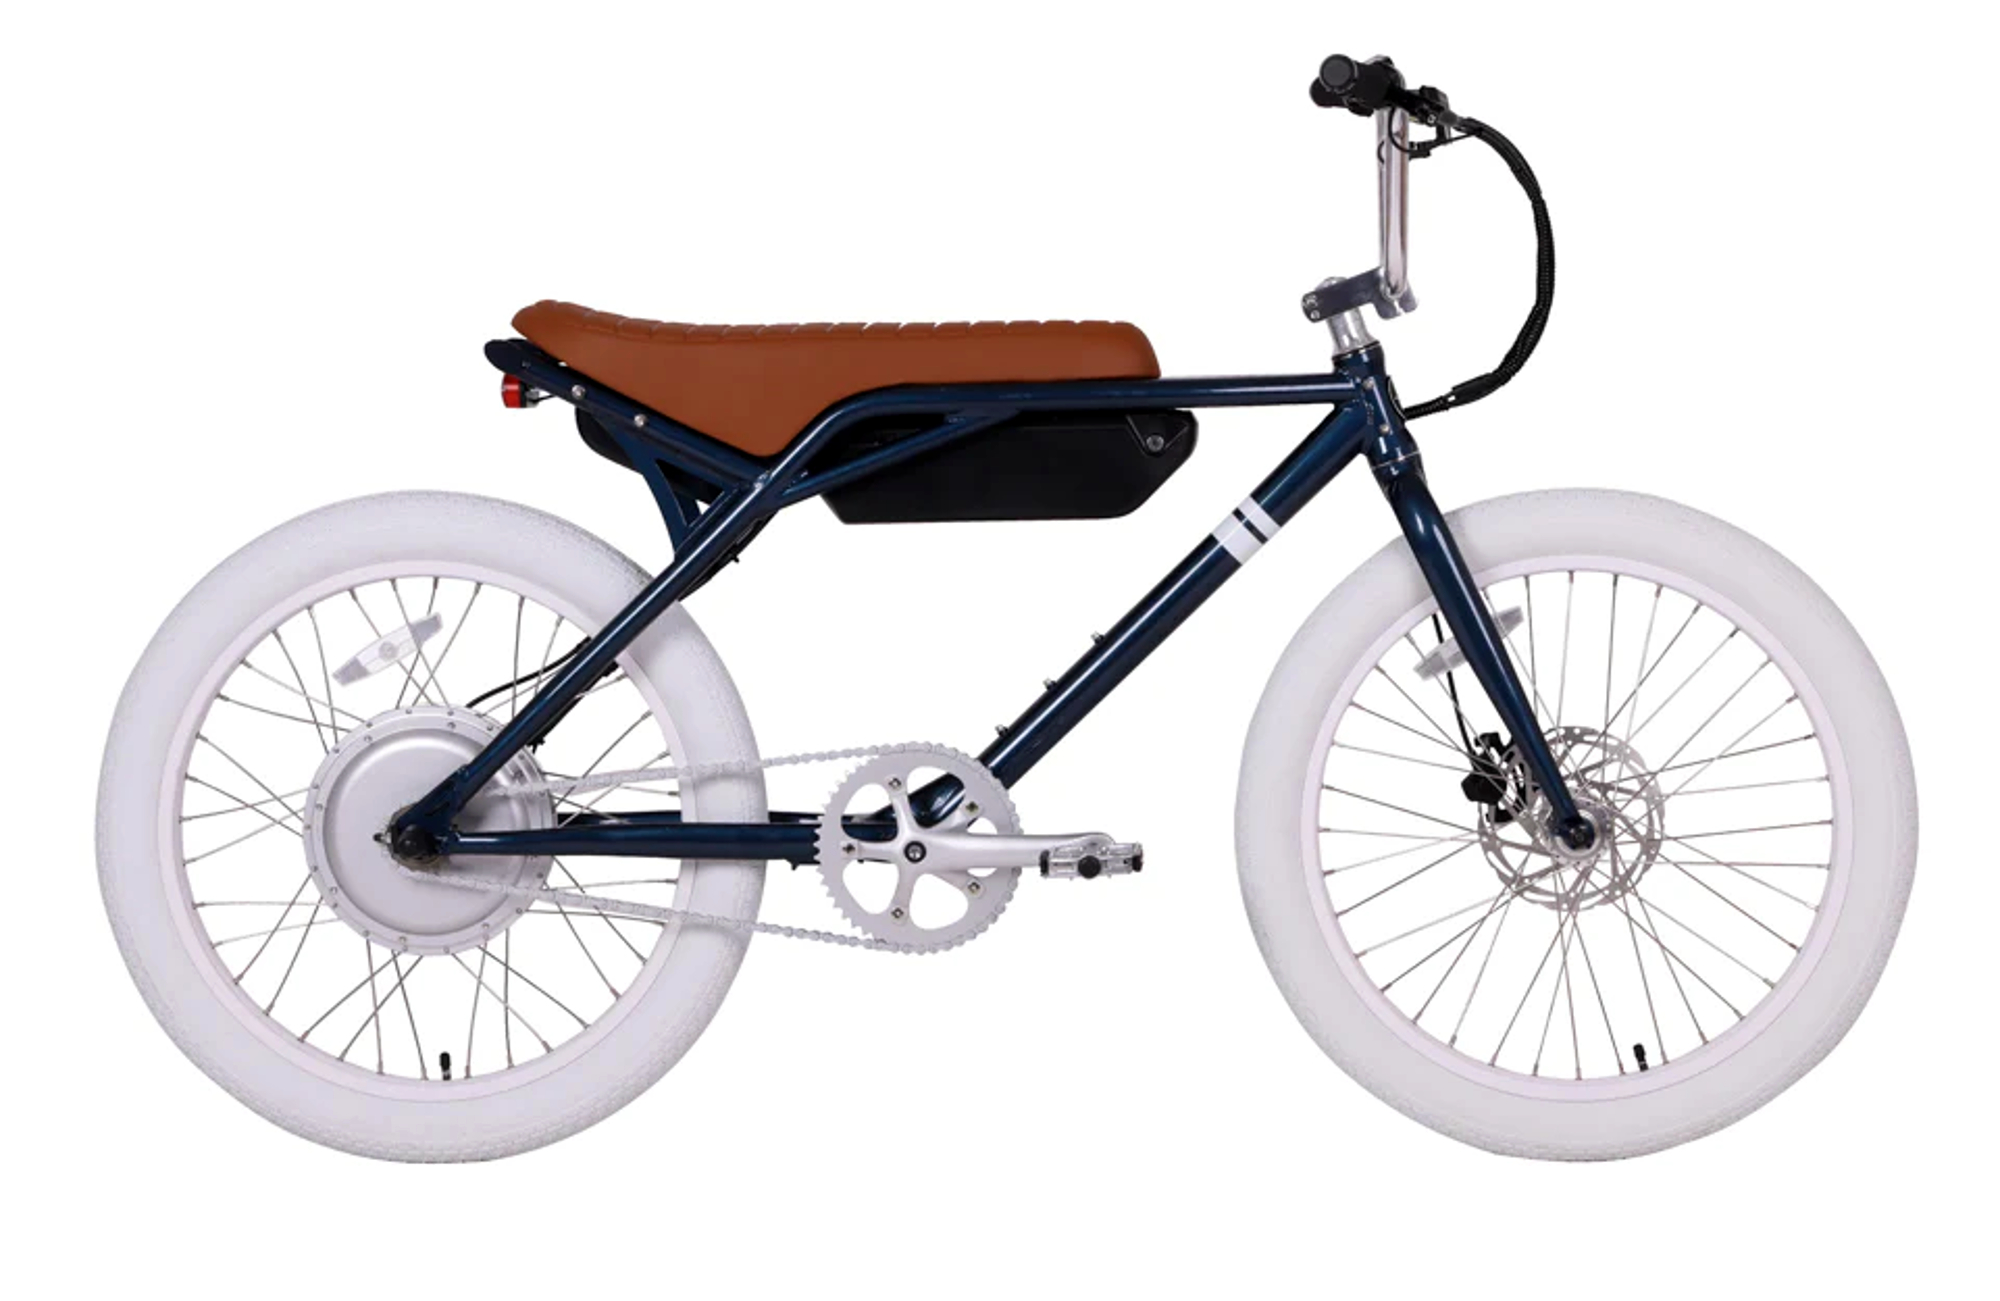 Sole e-24 electric bike in the Whaler colorway against a white background.